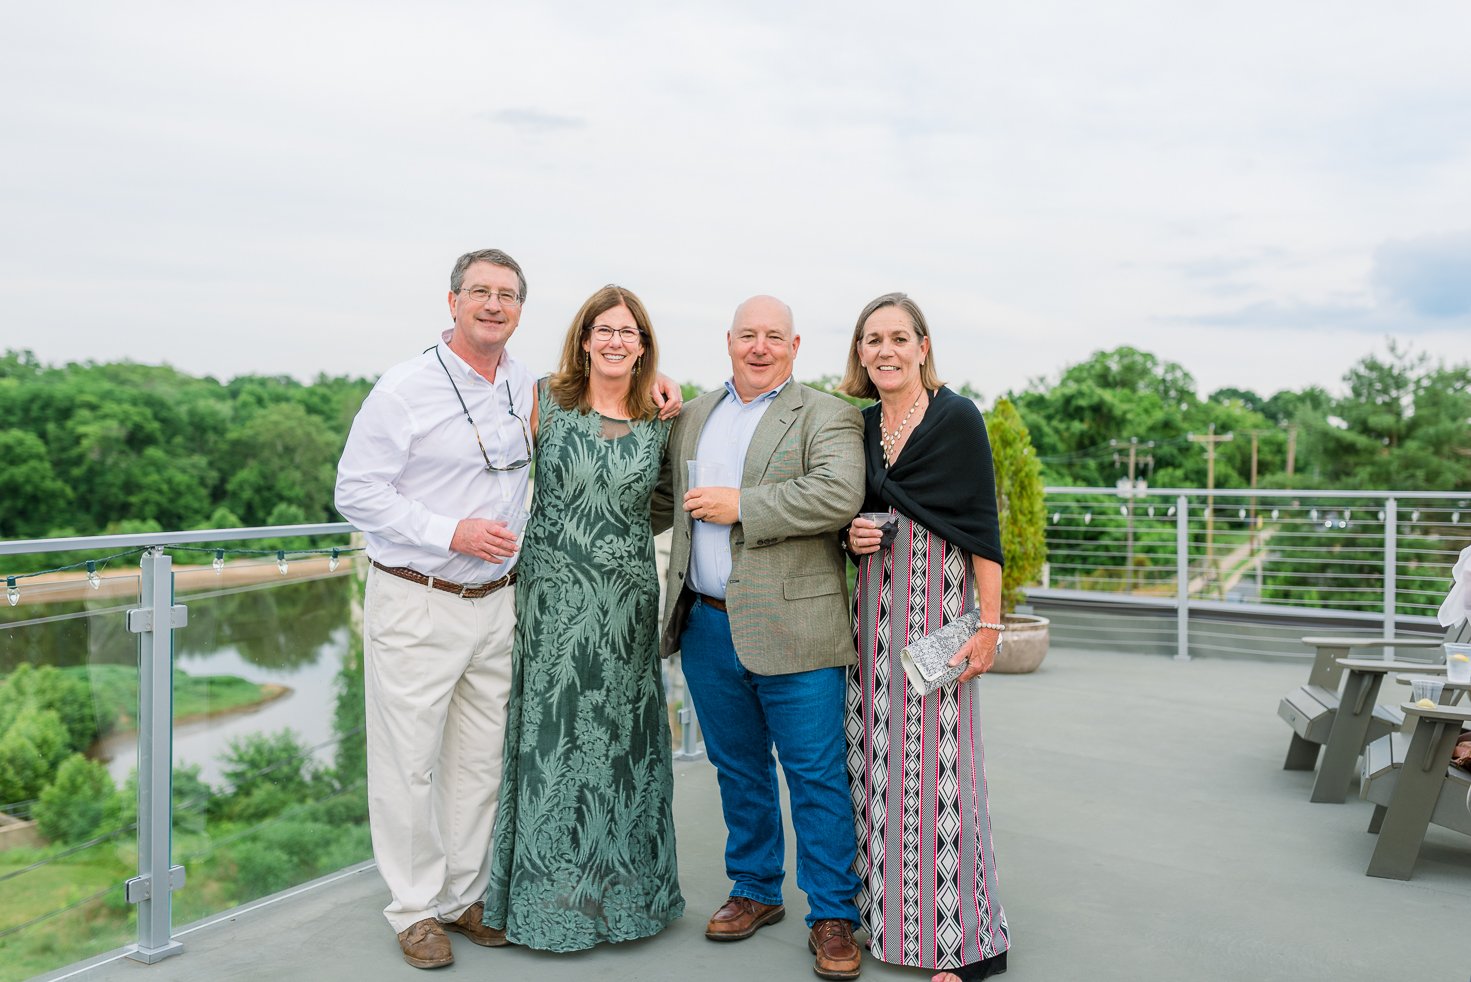 WoolenMill_TheSIlkMill_FredericksburgWeddingVenue_DowntownFredericksburg_VirginiaWeddingVenue_Event_BridalShow2023_youseephotography_pic9.jpg